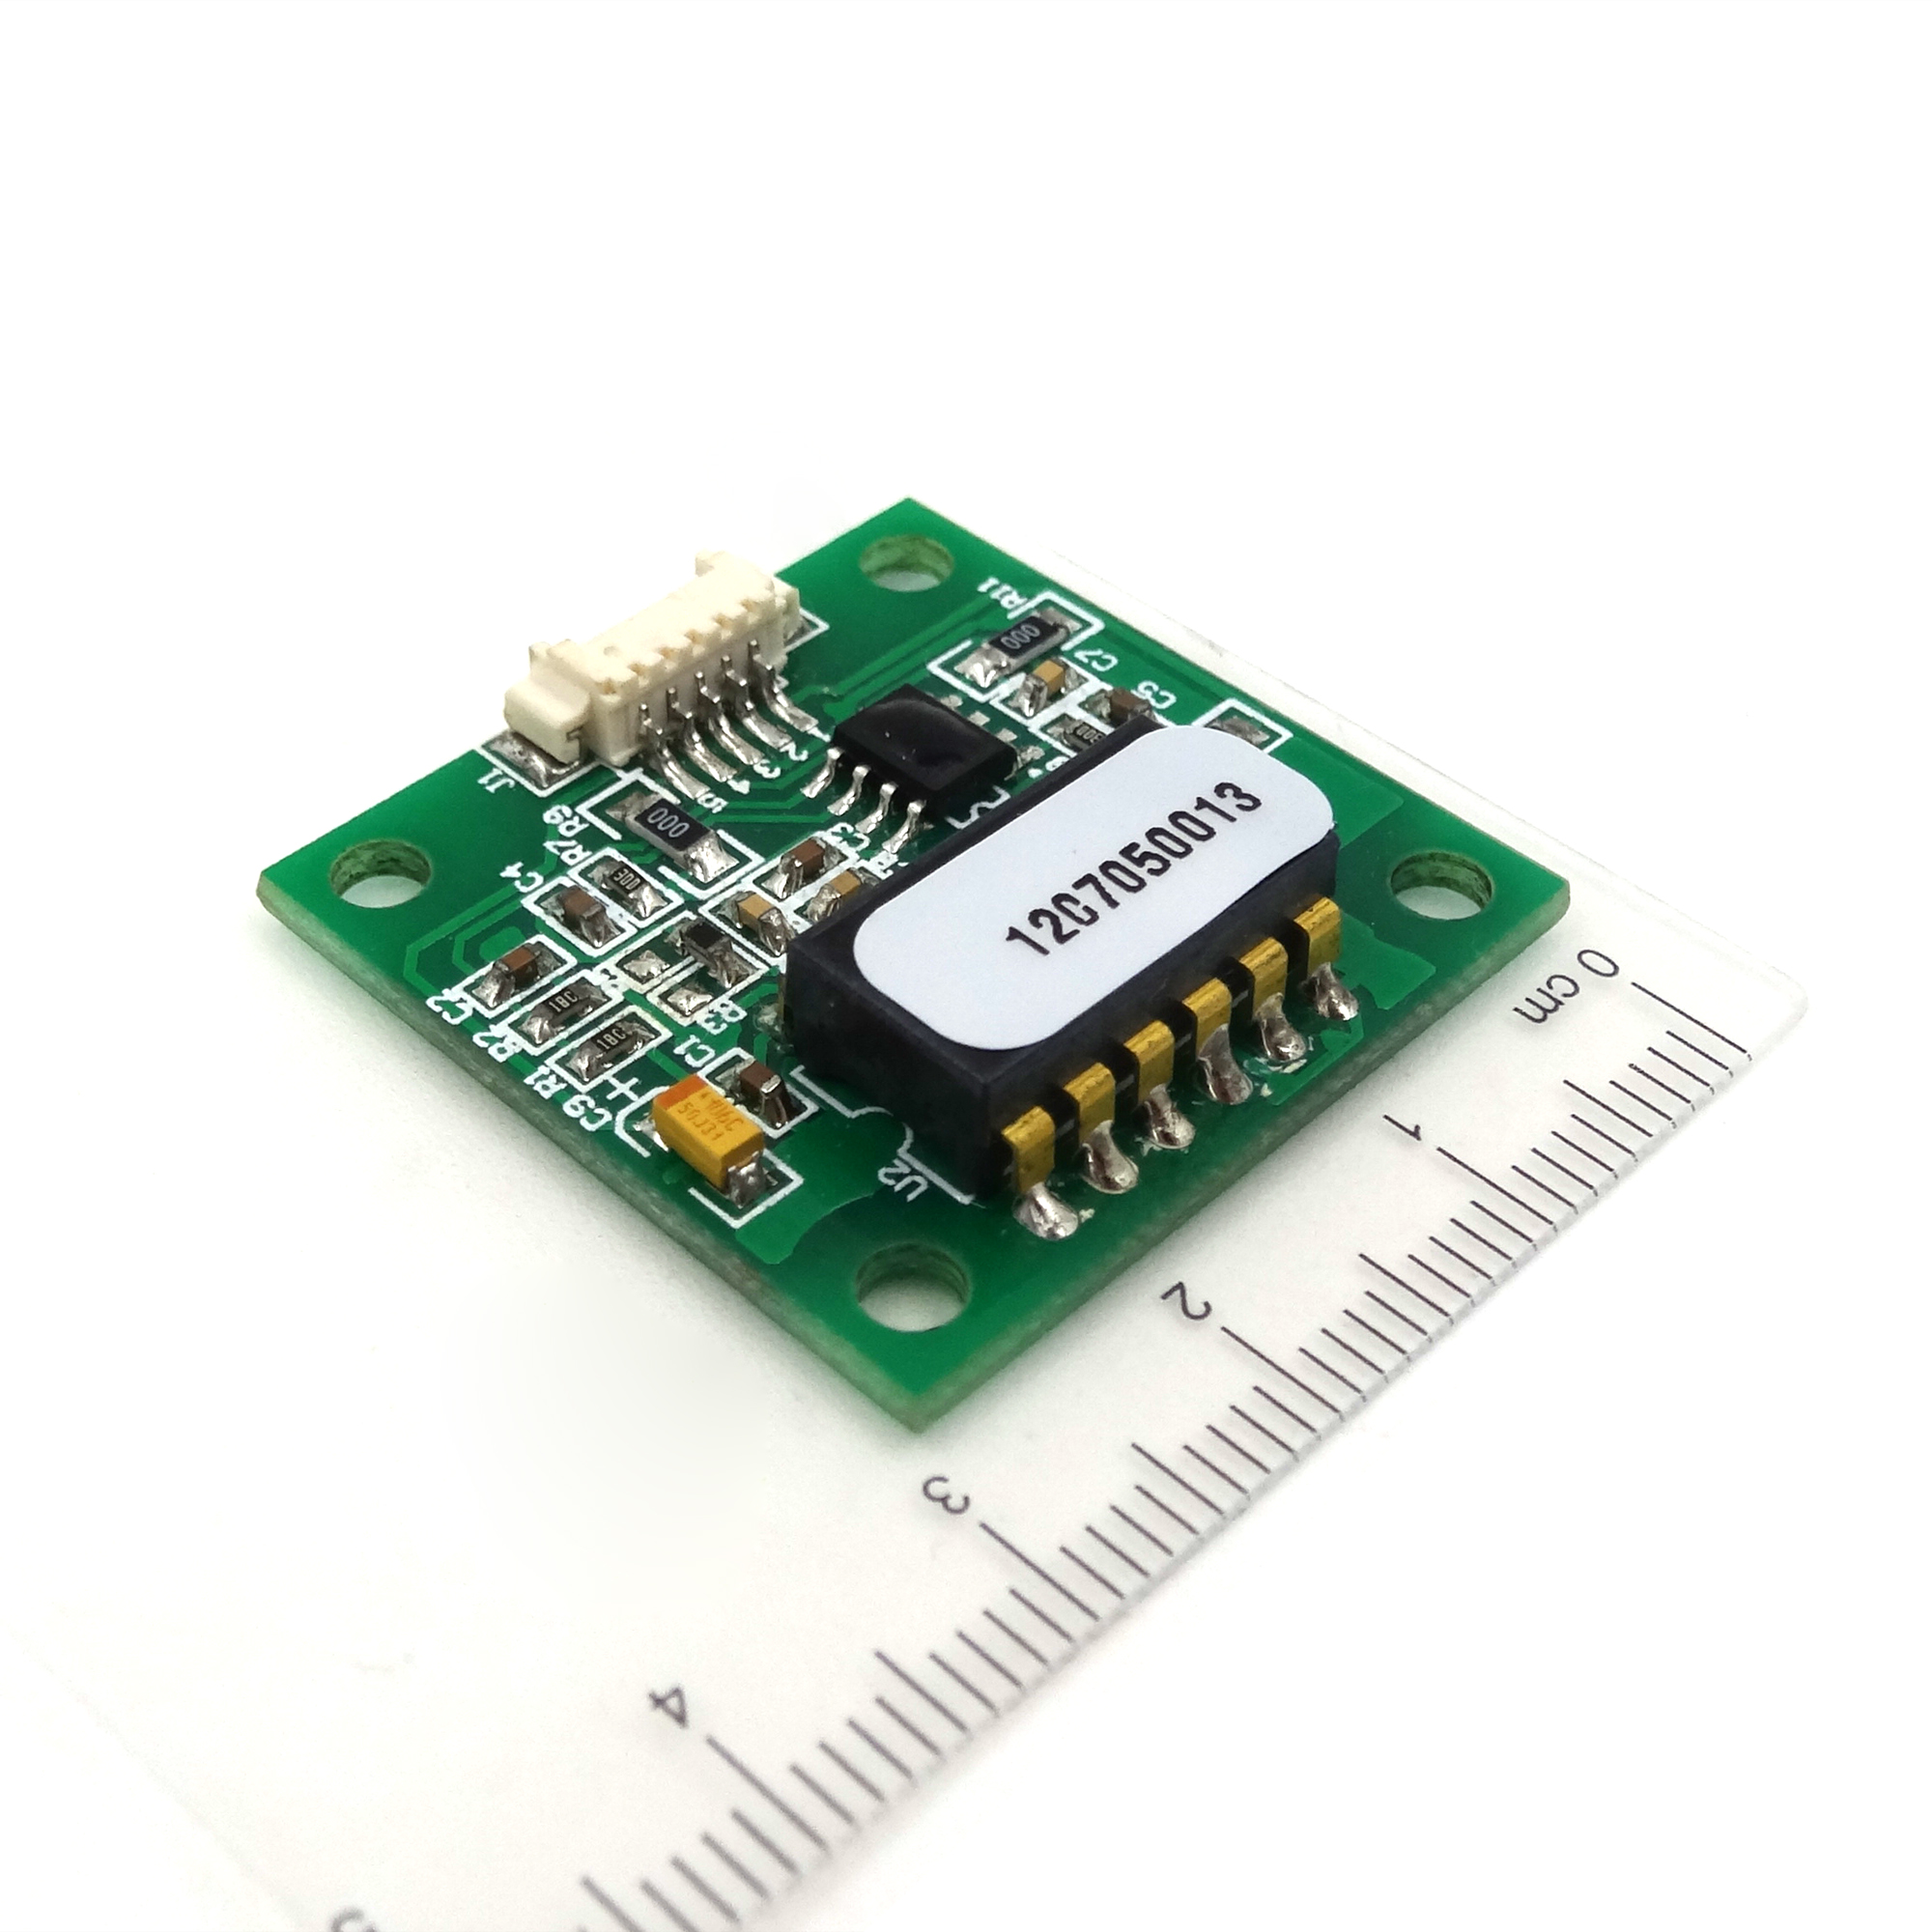  » Dual Axis Digital Output Inclinometer Bare Board